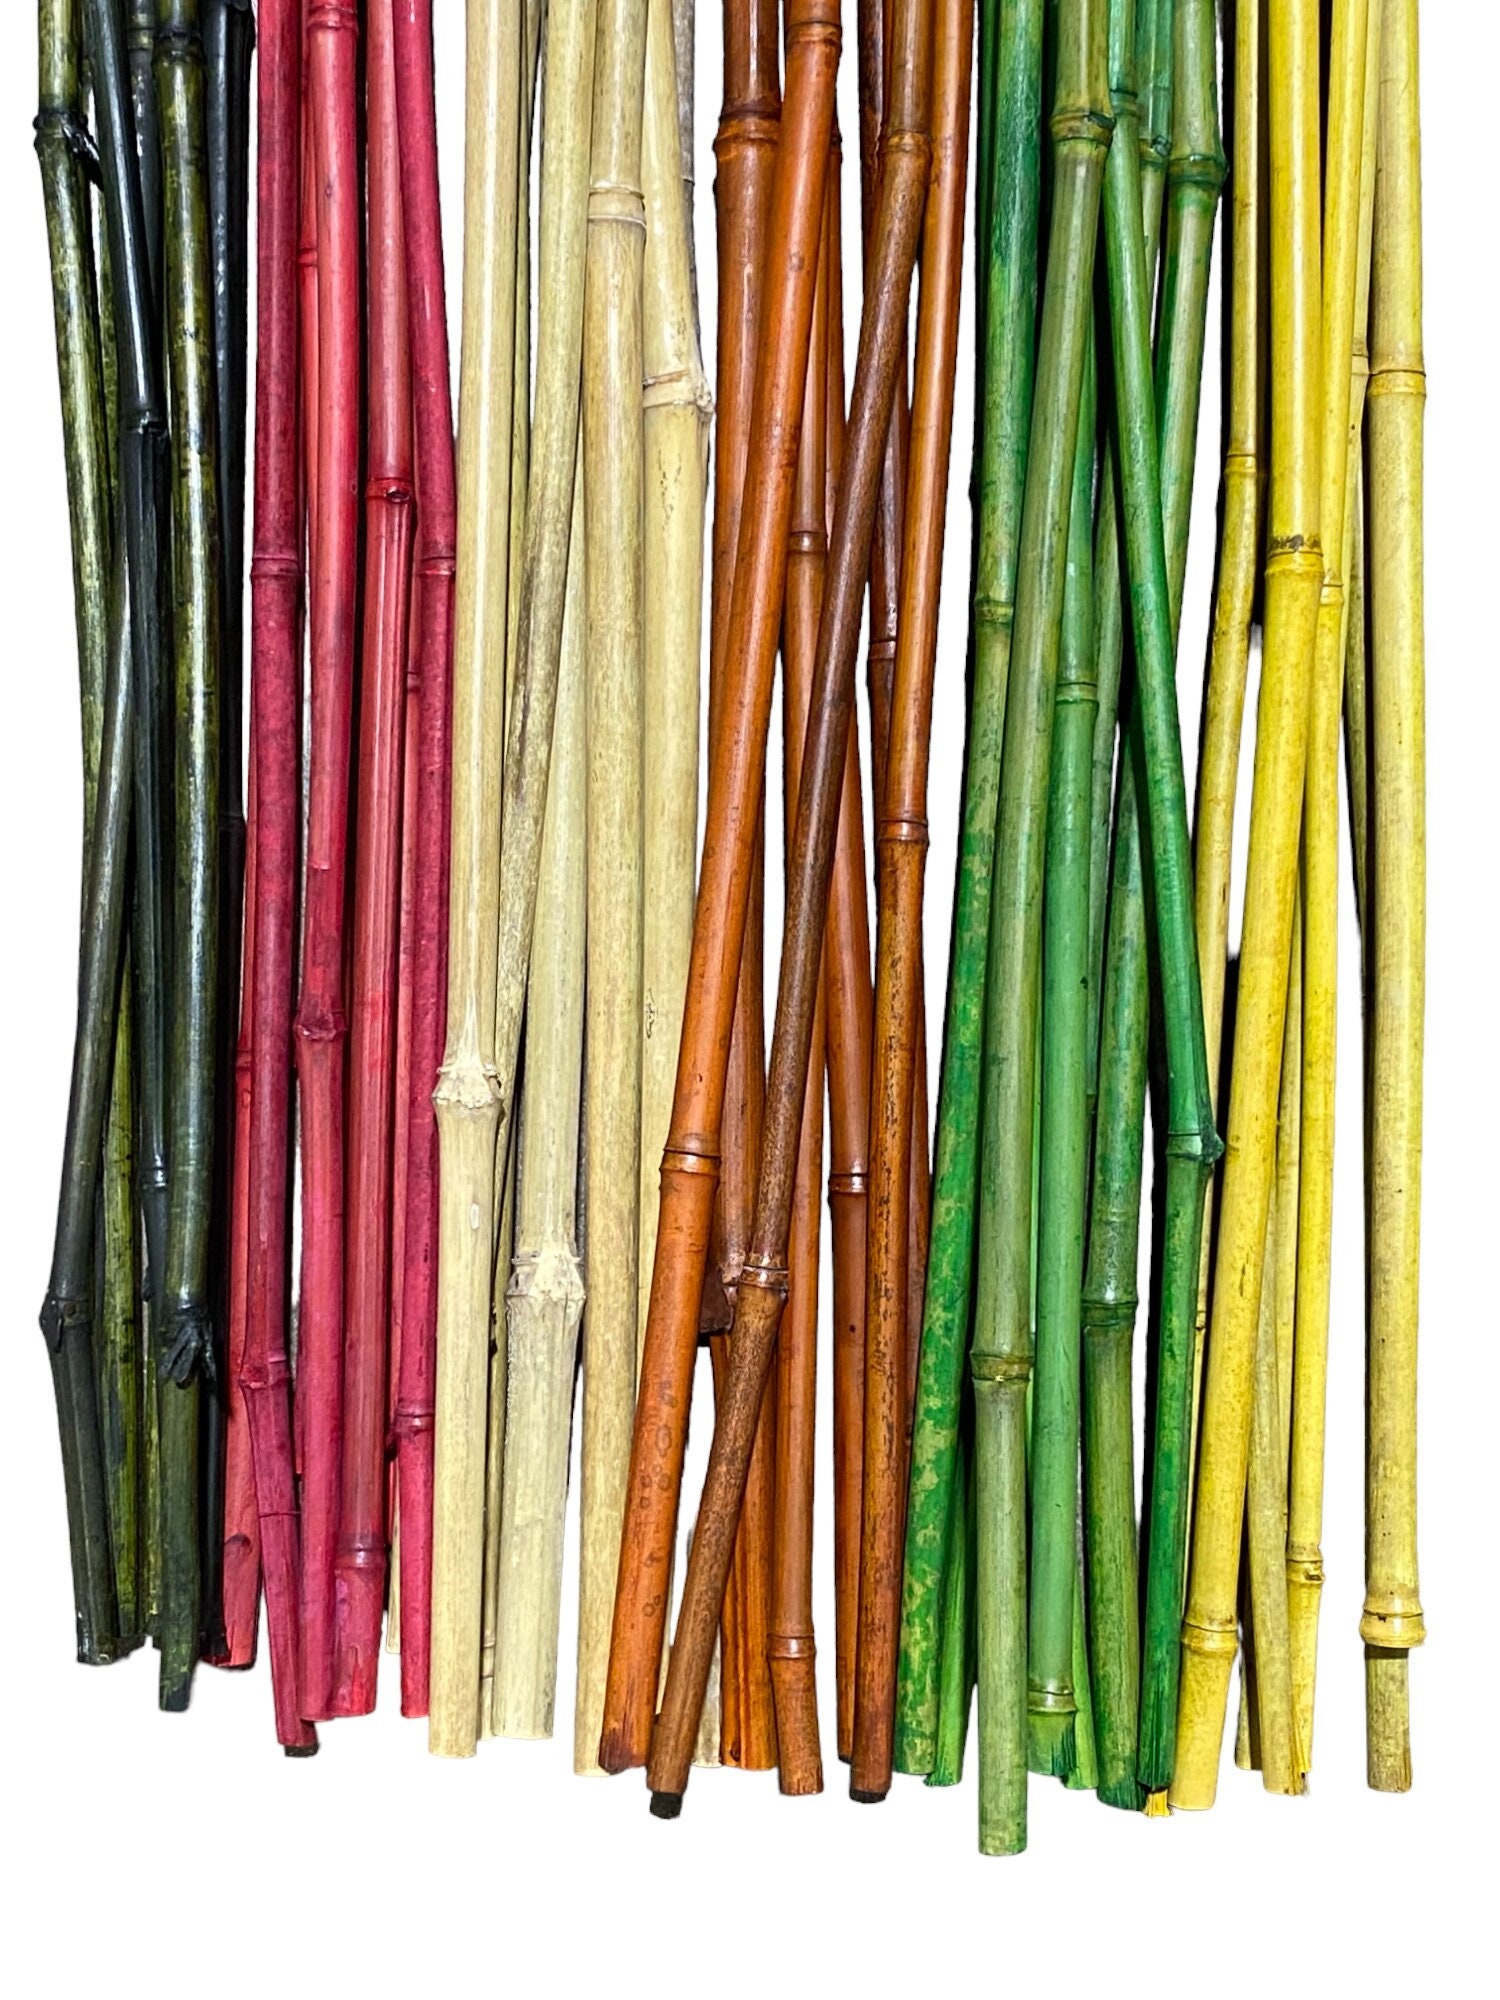 50pcs 15 Green Bamboo Plant Stakes, Plant Sticks Support, Floral Plant  Support